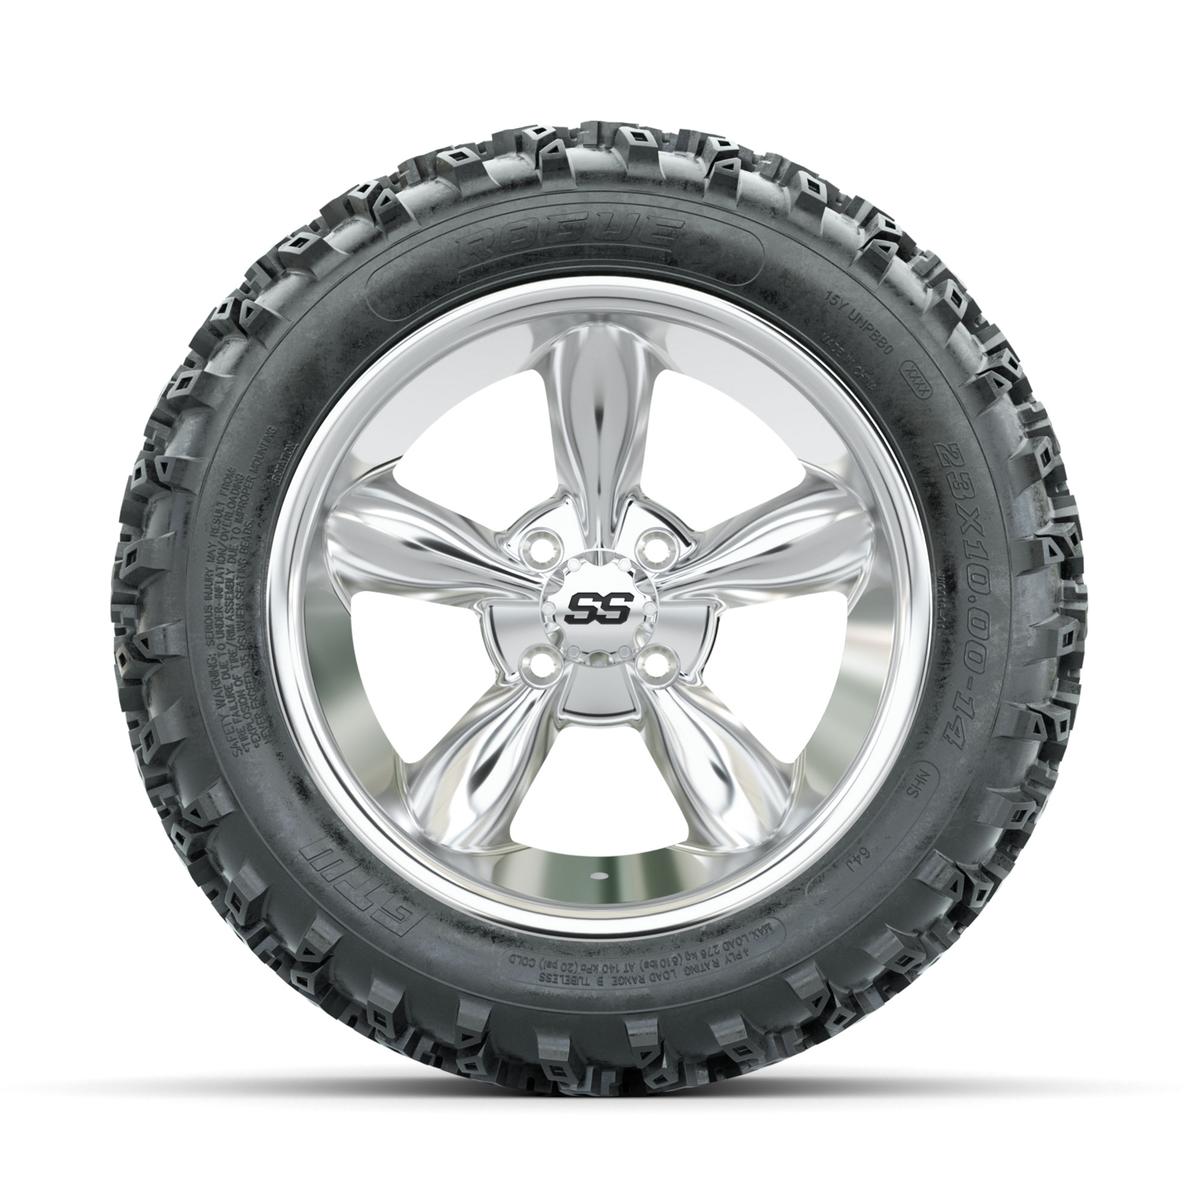 GTW Godfather Chrome 14 in Wheels with 23x10.00-14 Rogue All Terrain Tires – Full Set